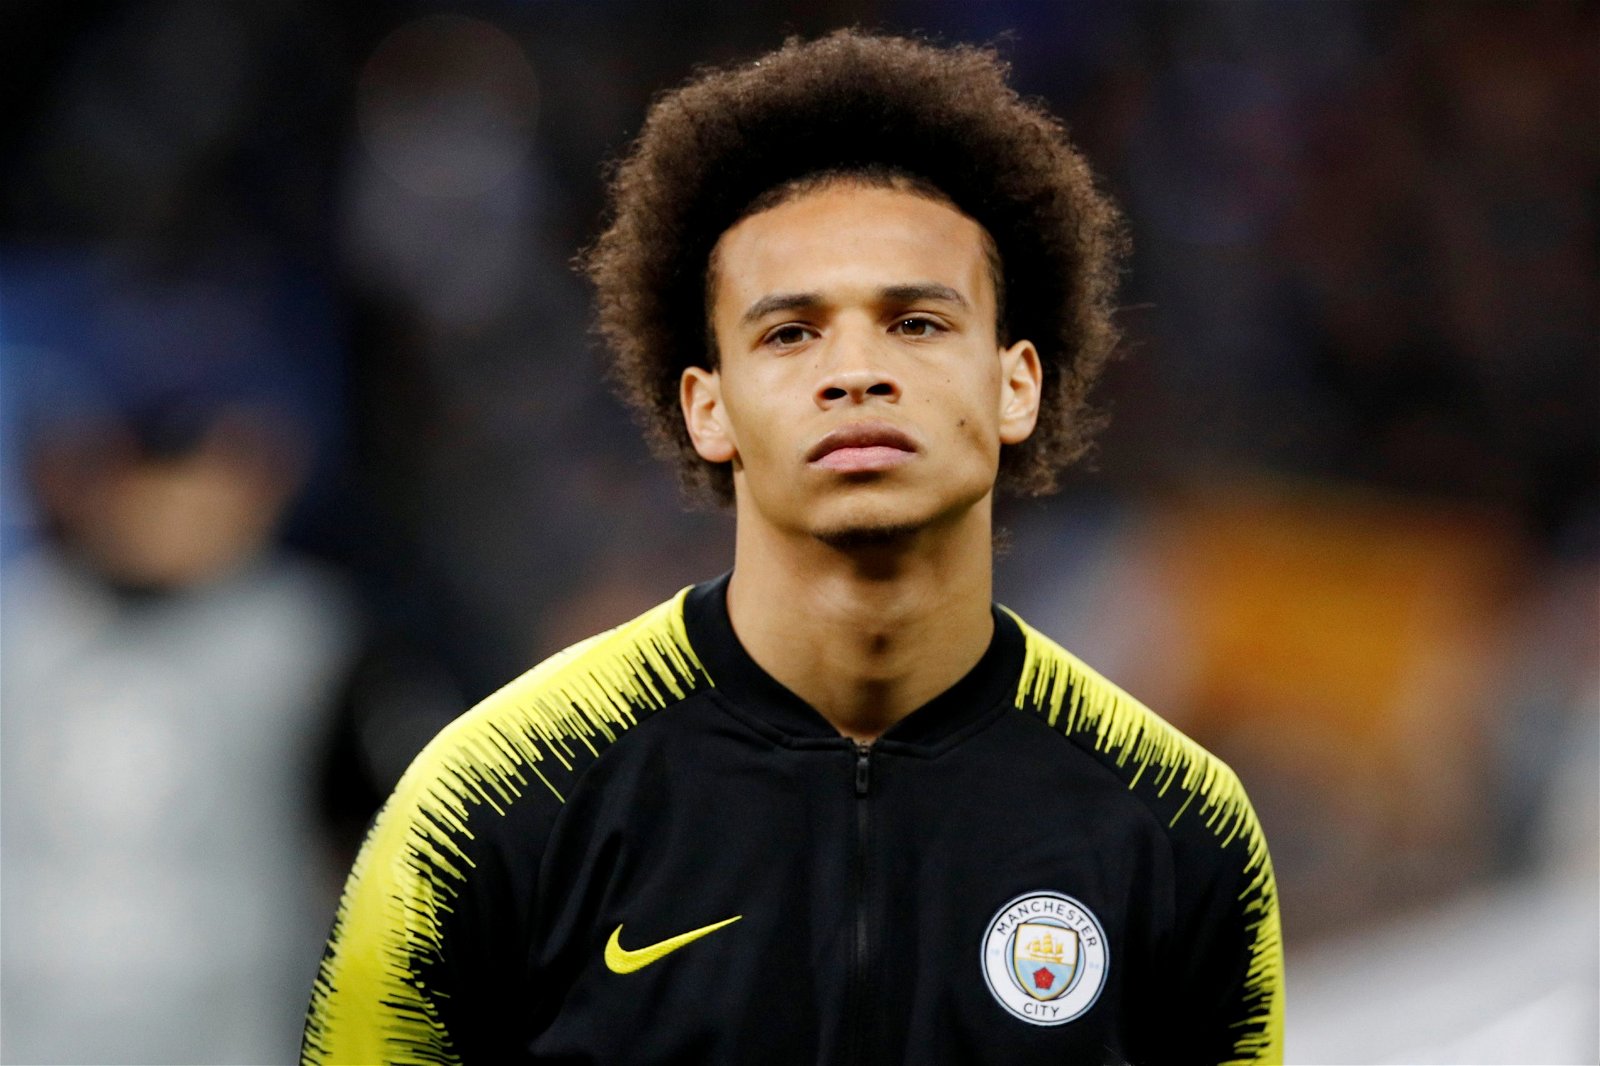 BREAKING: Manchester City Has Agreed To Sell Leroy Sane To Bayern Munich For £54.8m